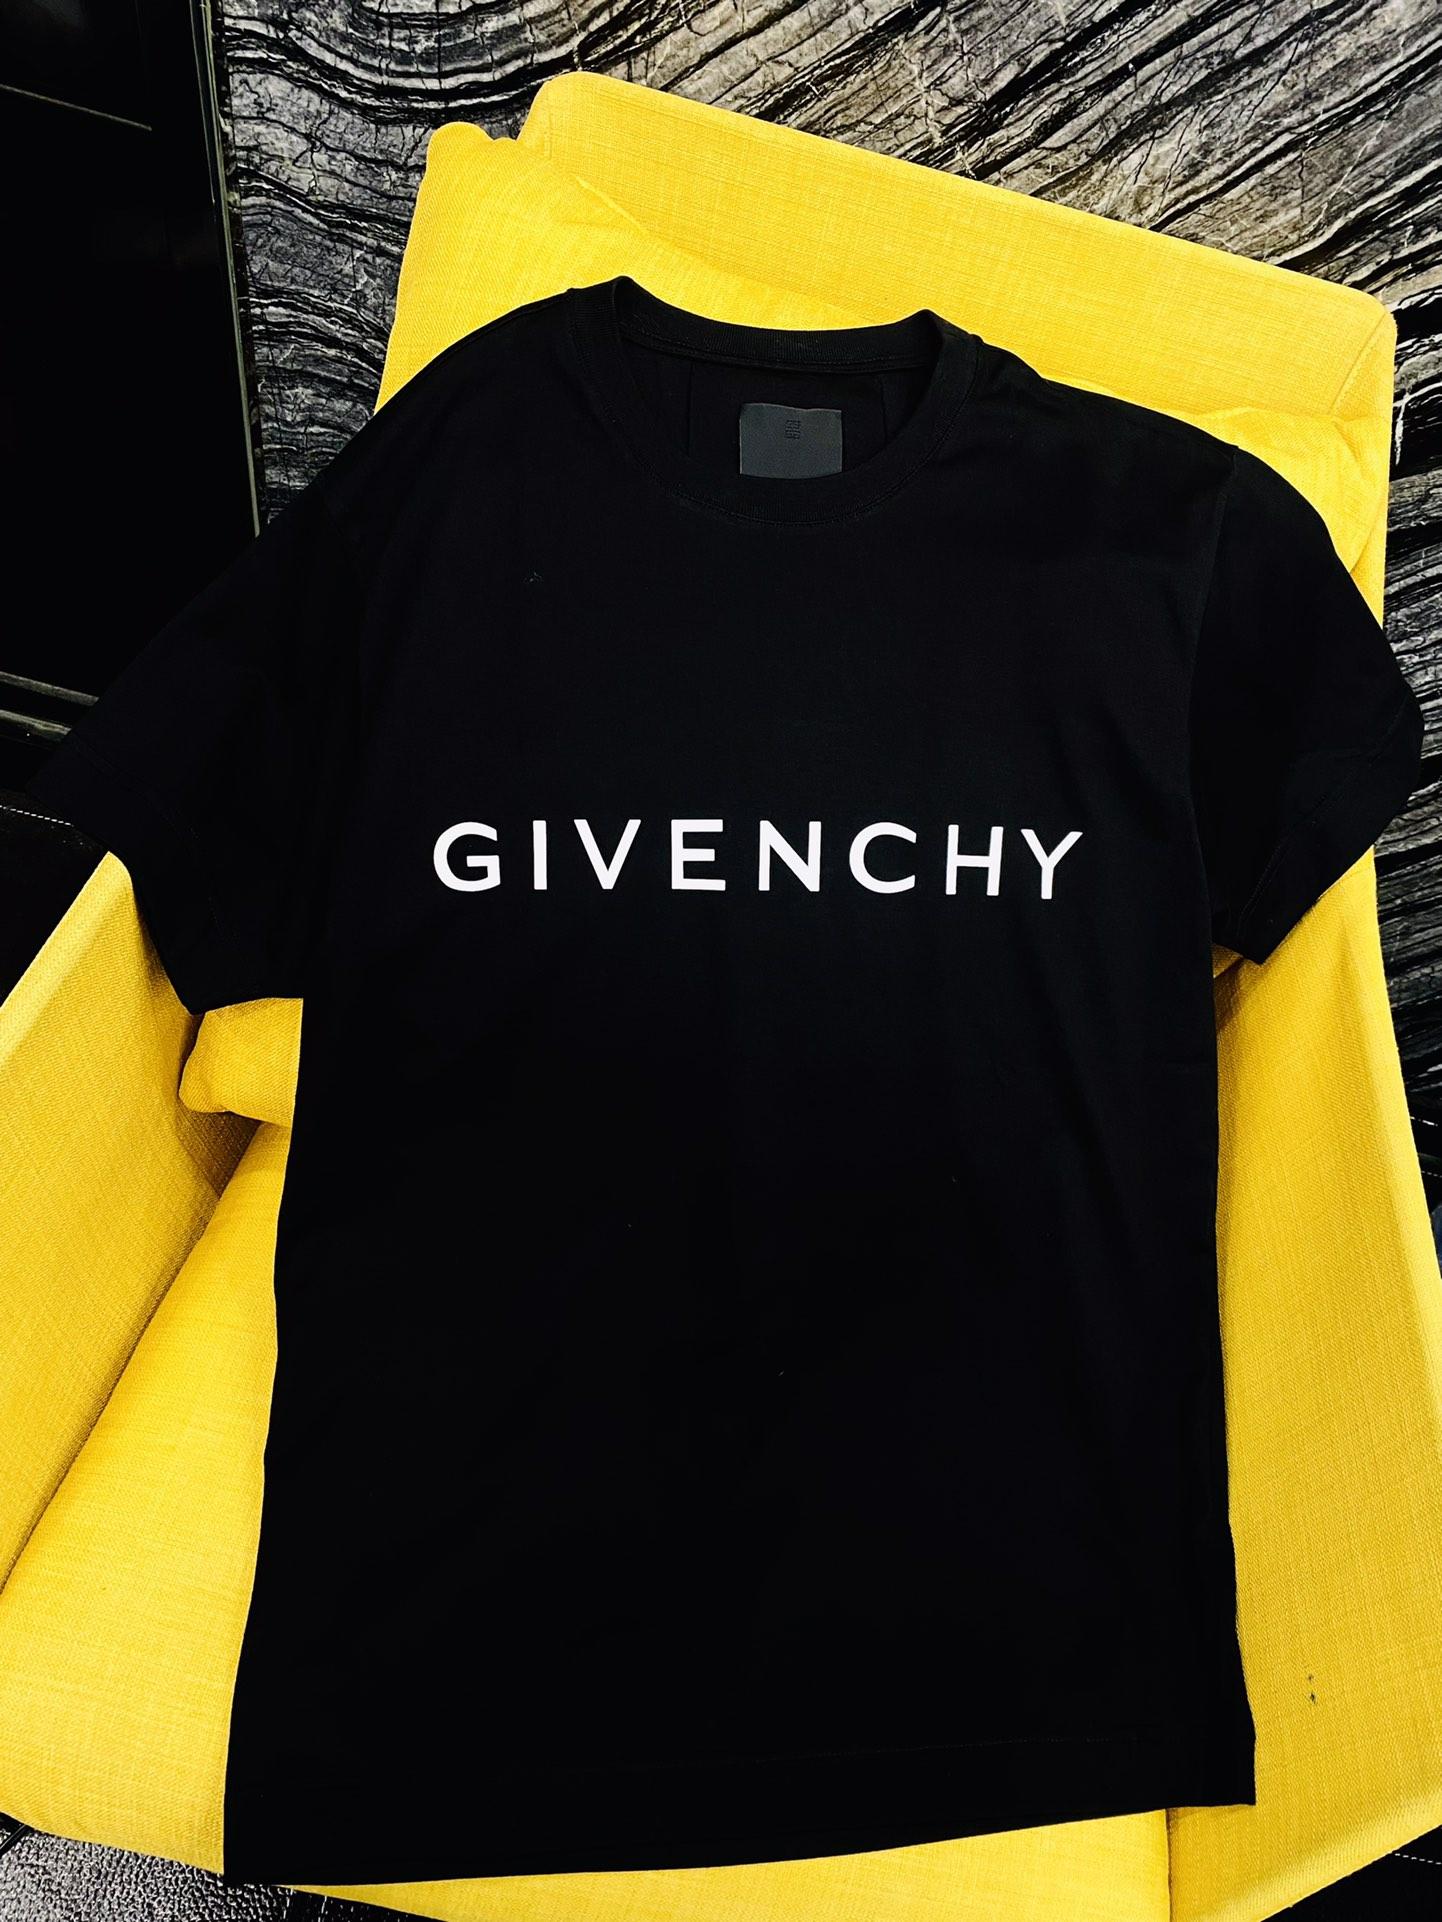 givenchy-archetype-slim-fit-t-shirt-in-cotton-5920_16845011224-1000